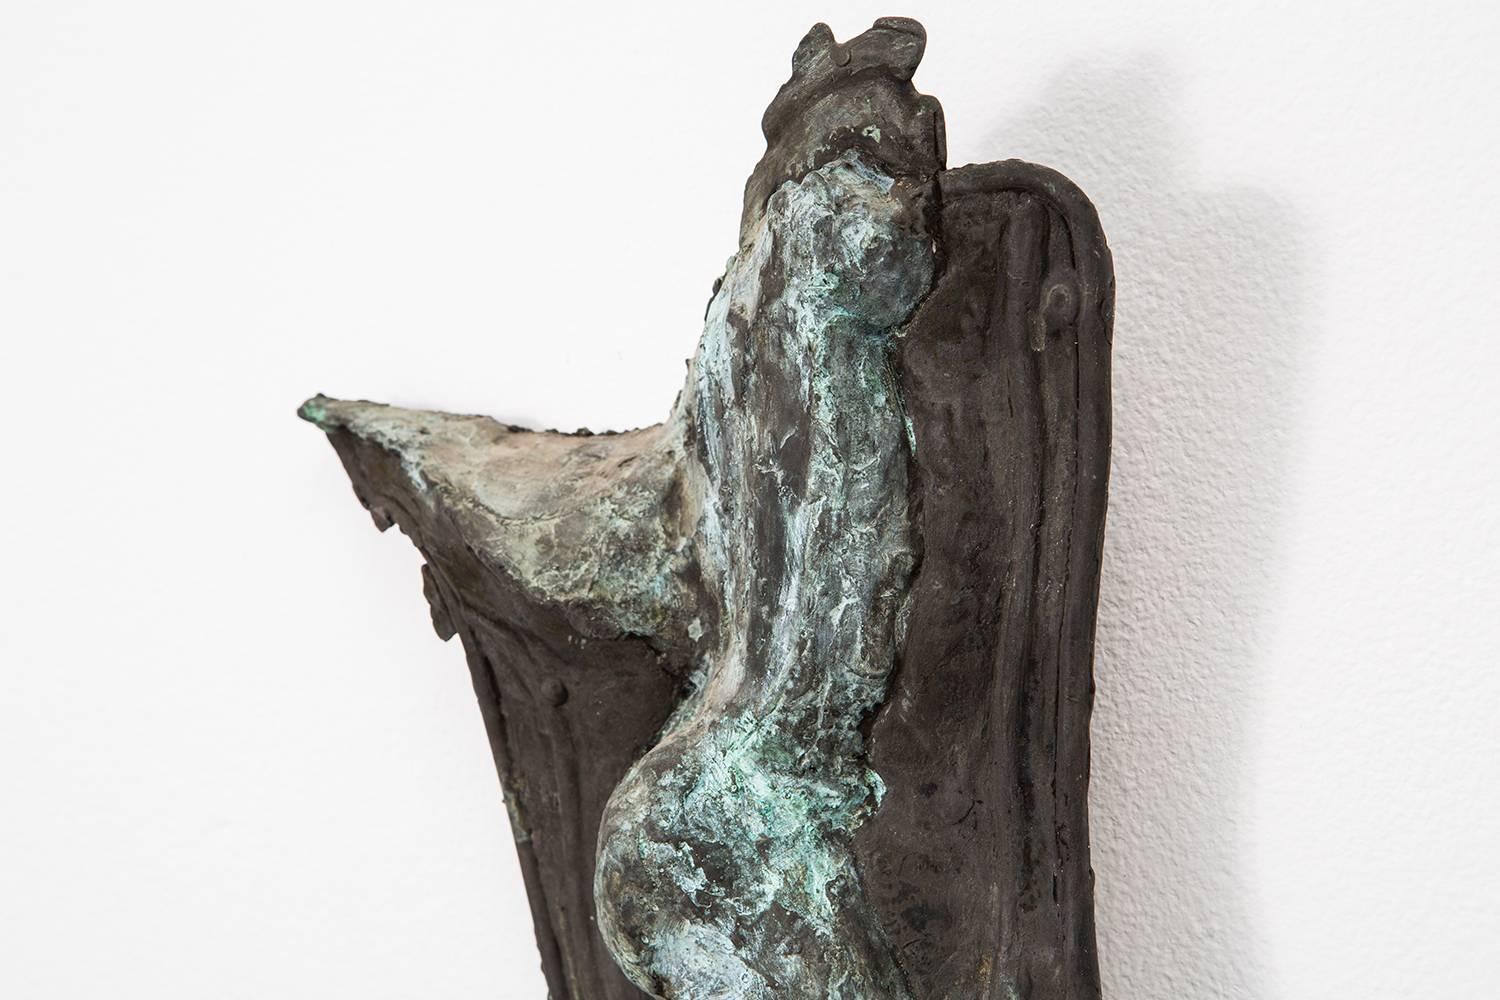 “Poised at Rest” a patinated bronze sculpture by Ruth Aizuss Migdal captures a reclining nude body. The patina provides this piece with a beautiful range of greens and blues that highlight the intricate fold and details.

Through a puzzle-like